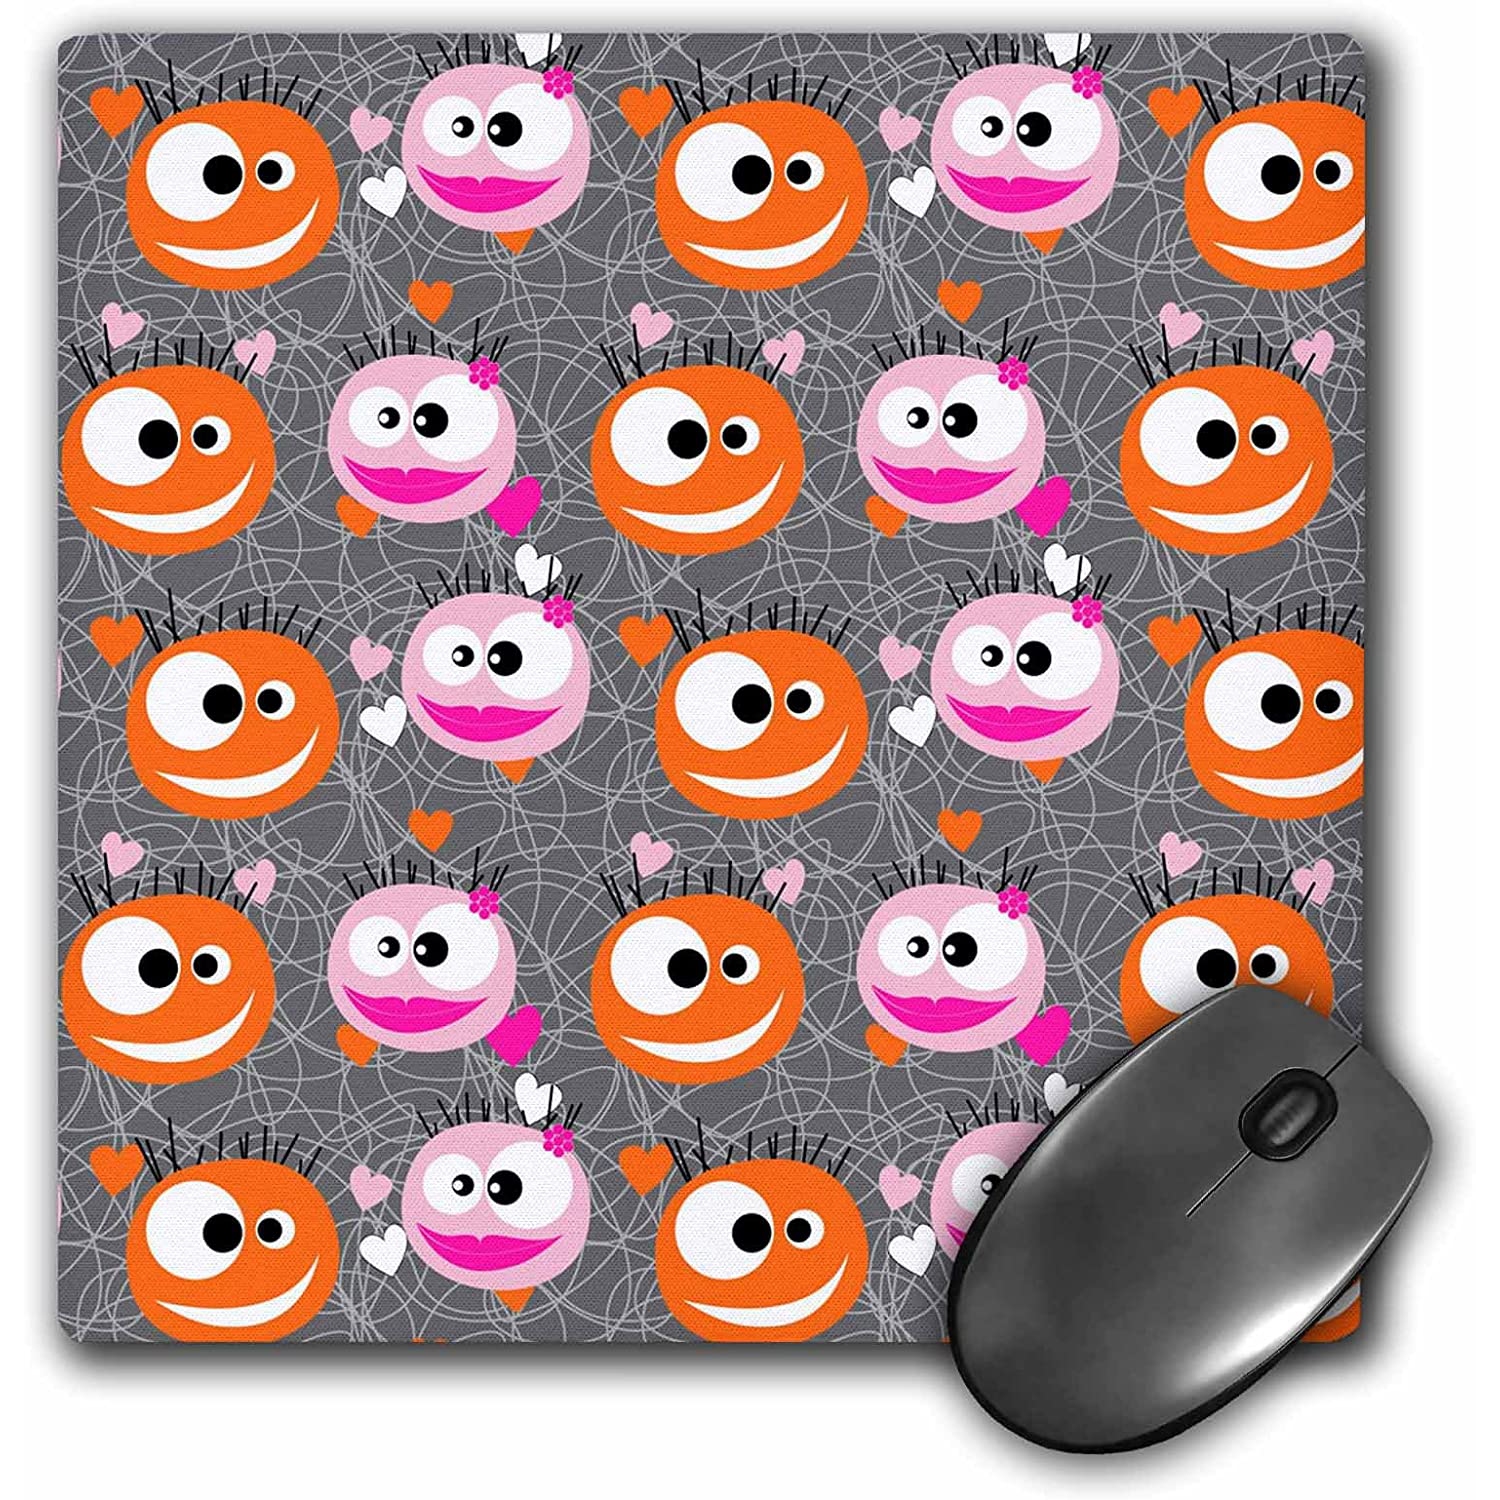 LLC 8 X 0.25 Inches Mouse Pad, Orange/Pink Cute Monster Pattern with Fun Eyes and Kissy Lips (mp_78220_1)